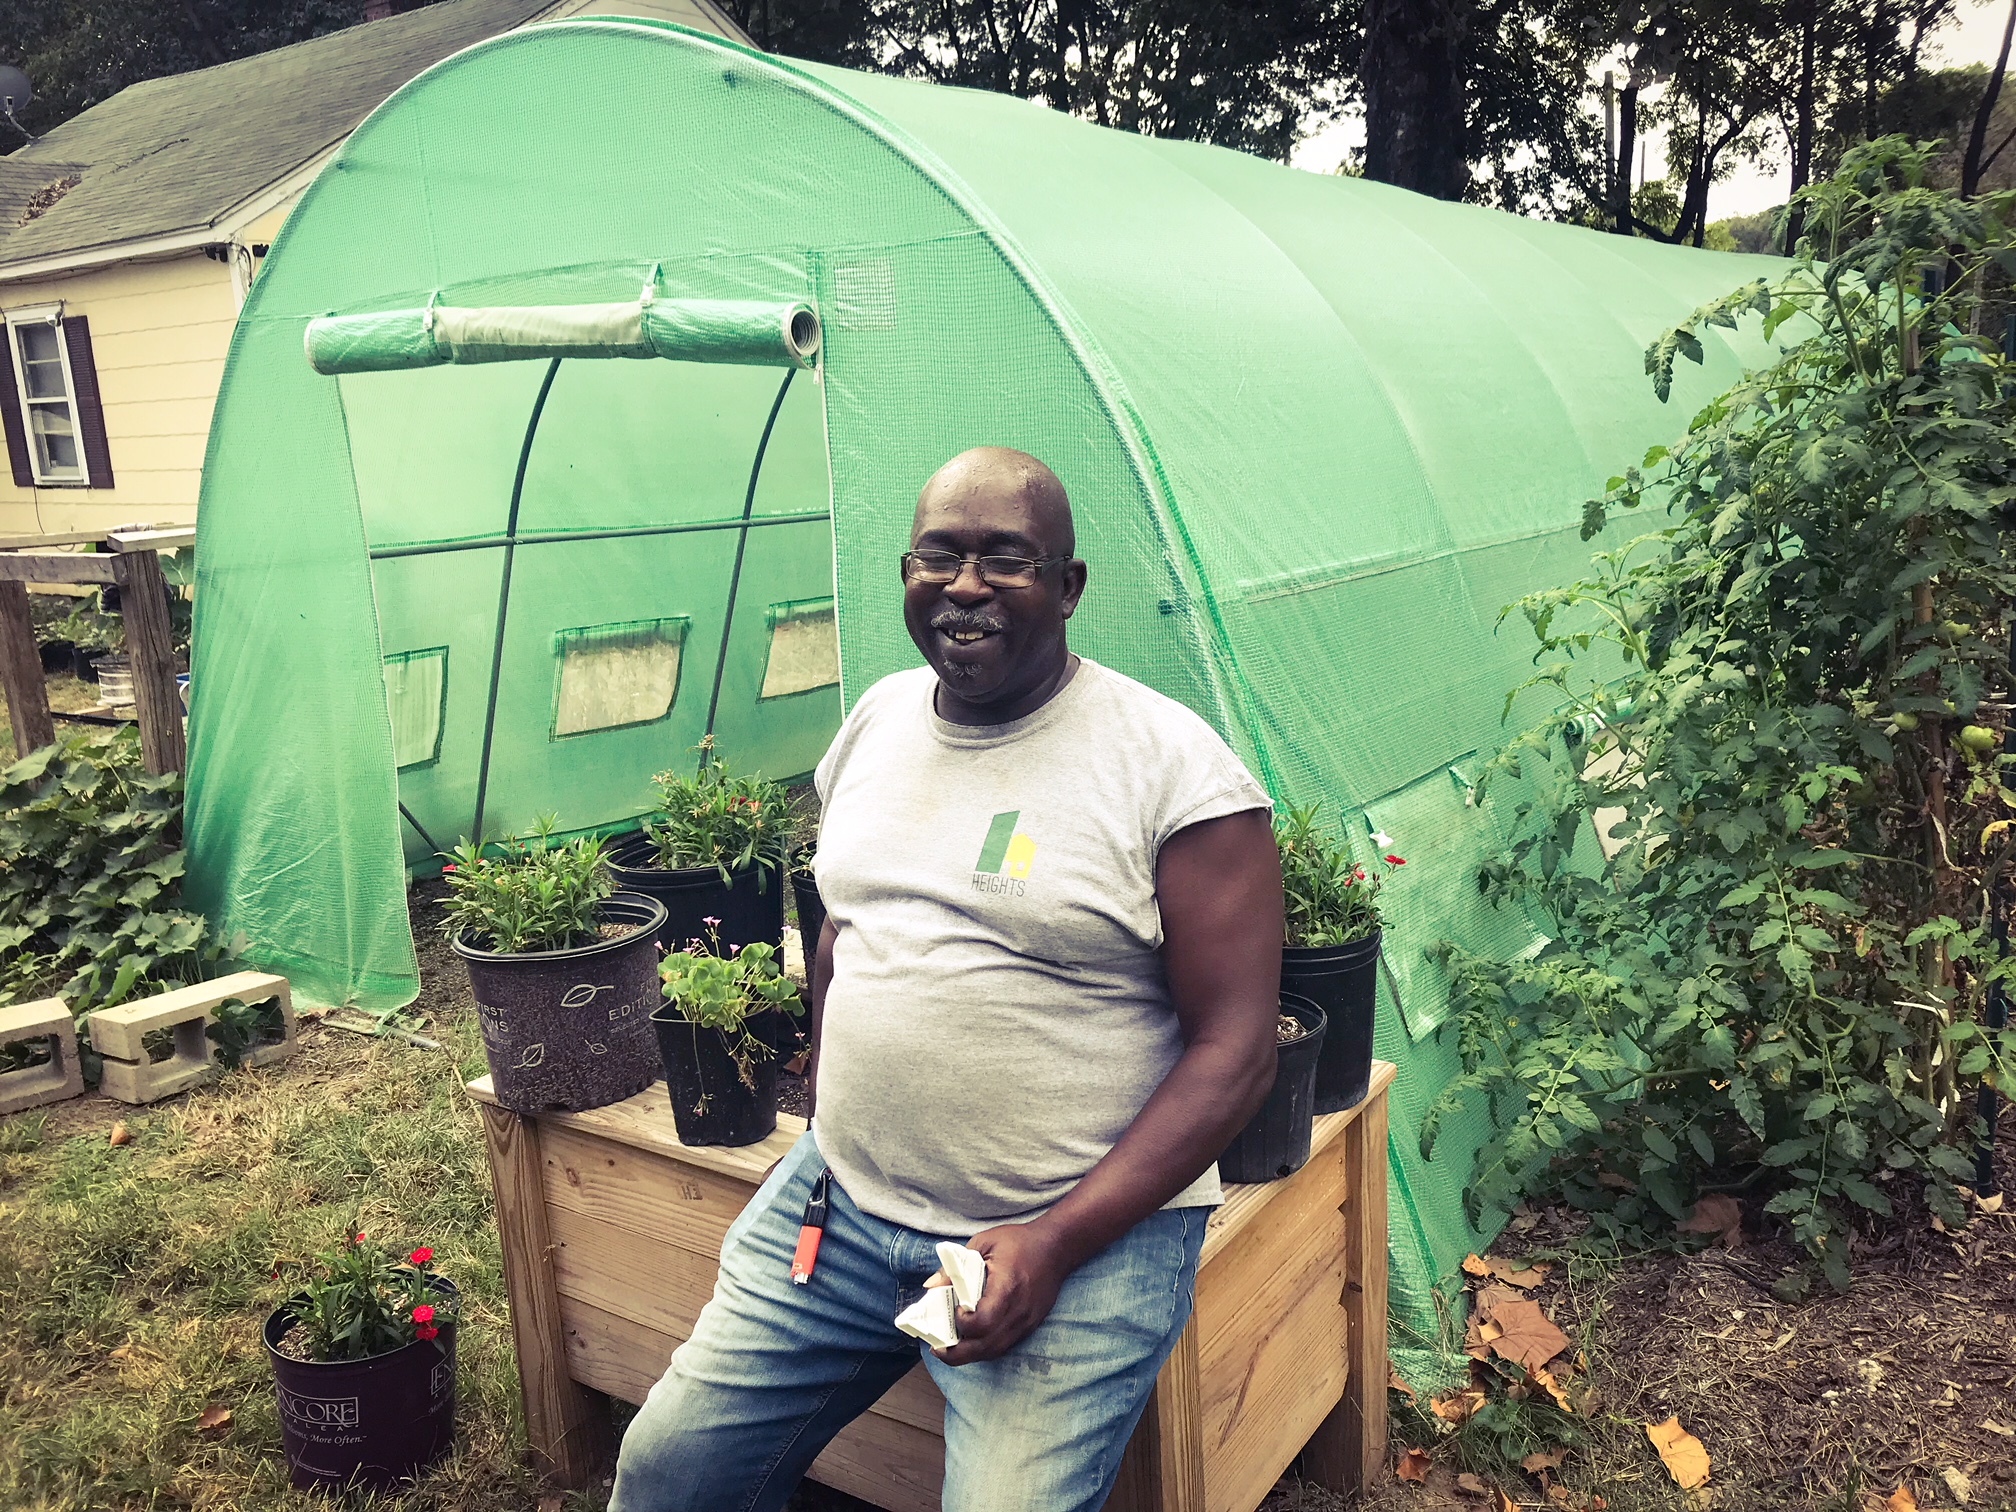 Sidney Johnson, president of the Mitchell Heights Neighborhood Association, poses in front of the hoop house at the Mitchell Heights Landscape Garden and Nursery. (Cole Bradley)